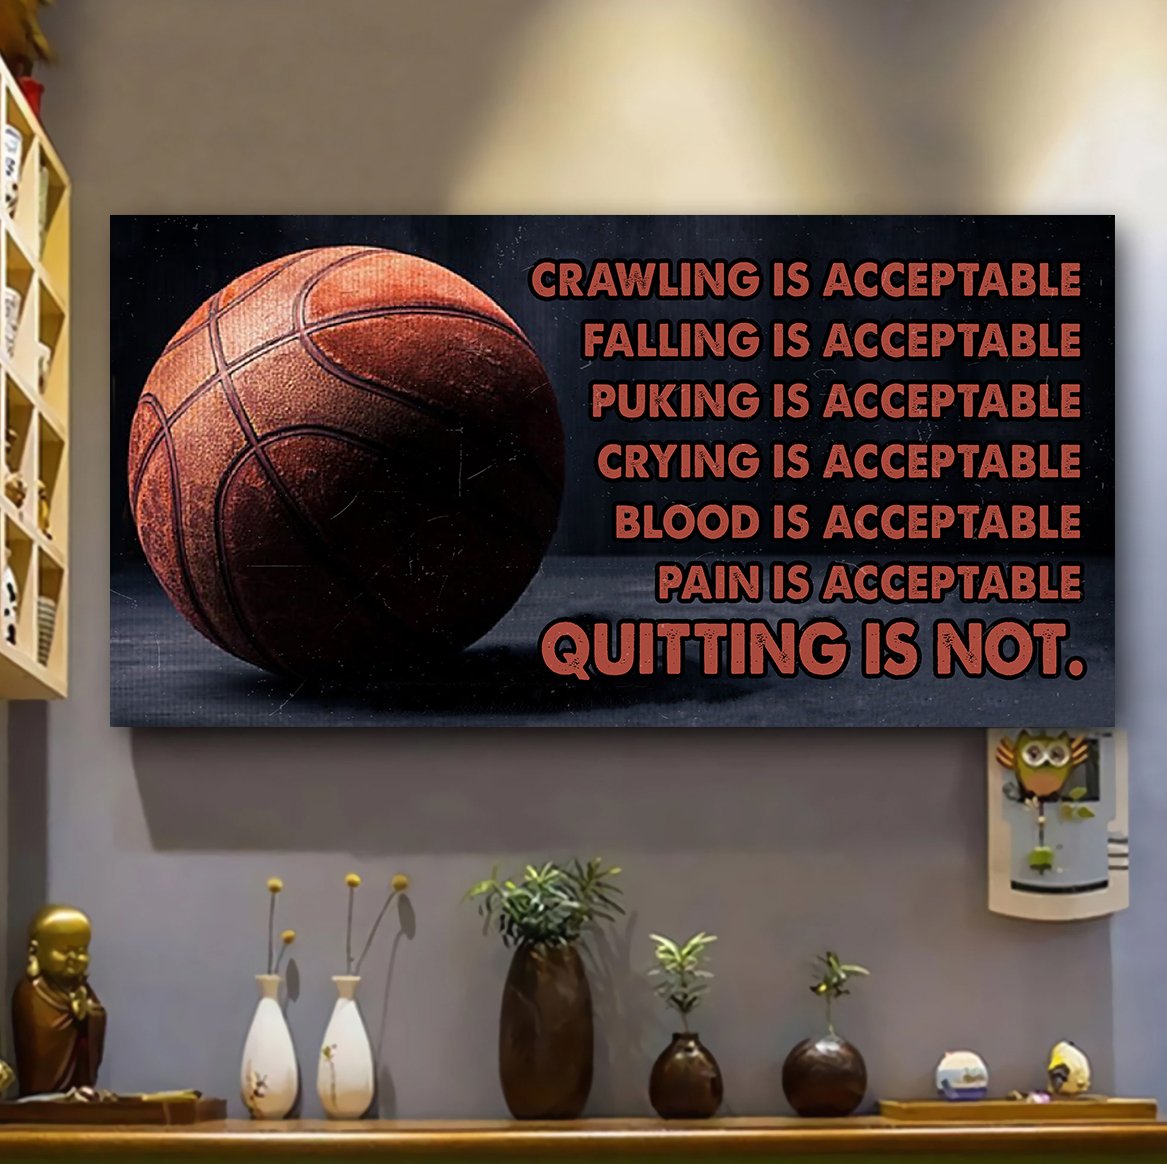 Customizable basketball poster – quitting is not